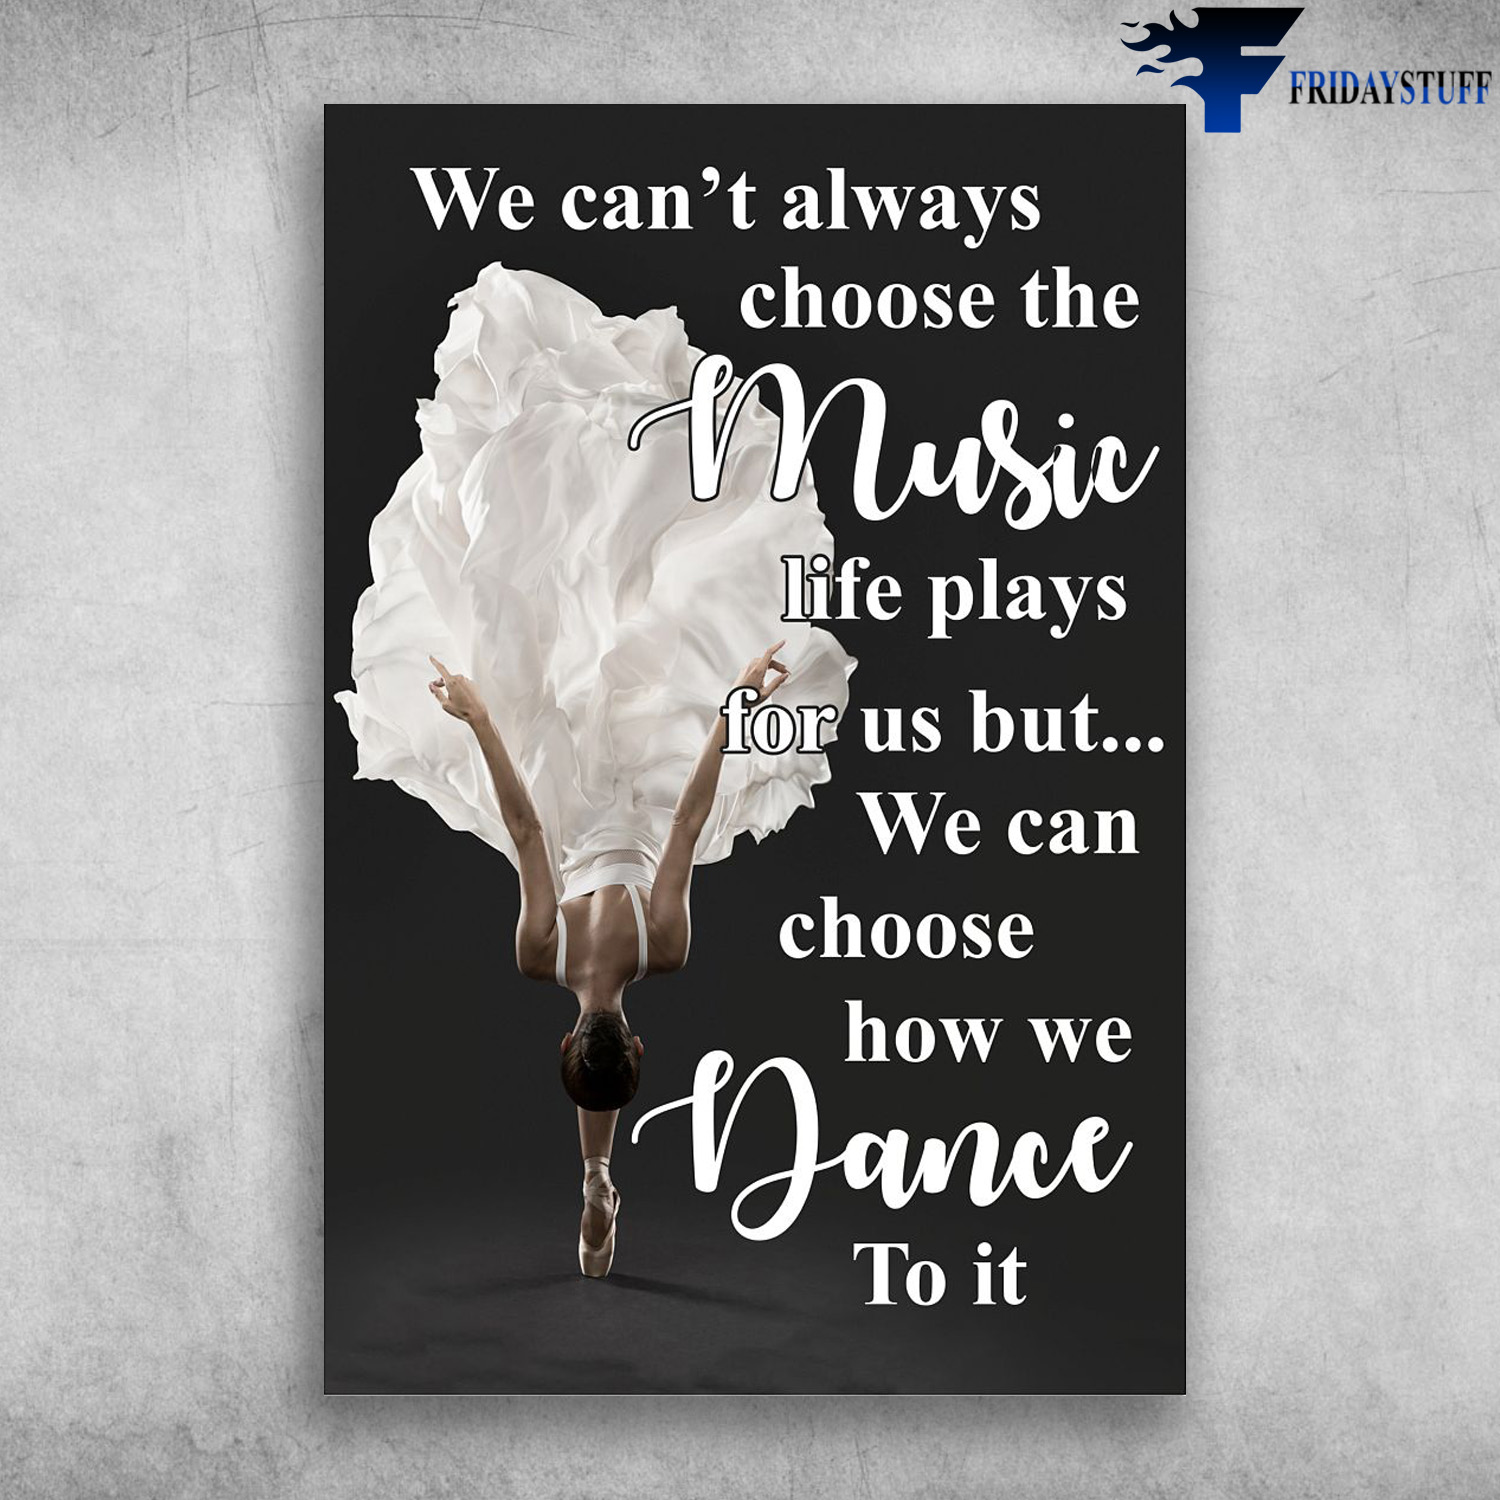 Ballet Dancer - We Can't Always Choose The Music Life Plays For Us But, We Can Choose How We Dance To it